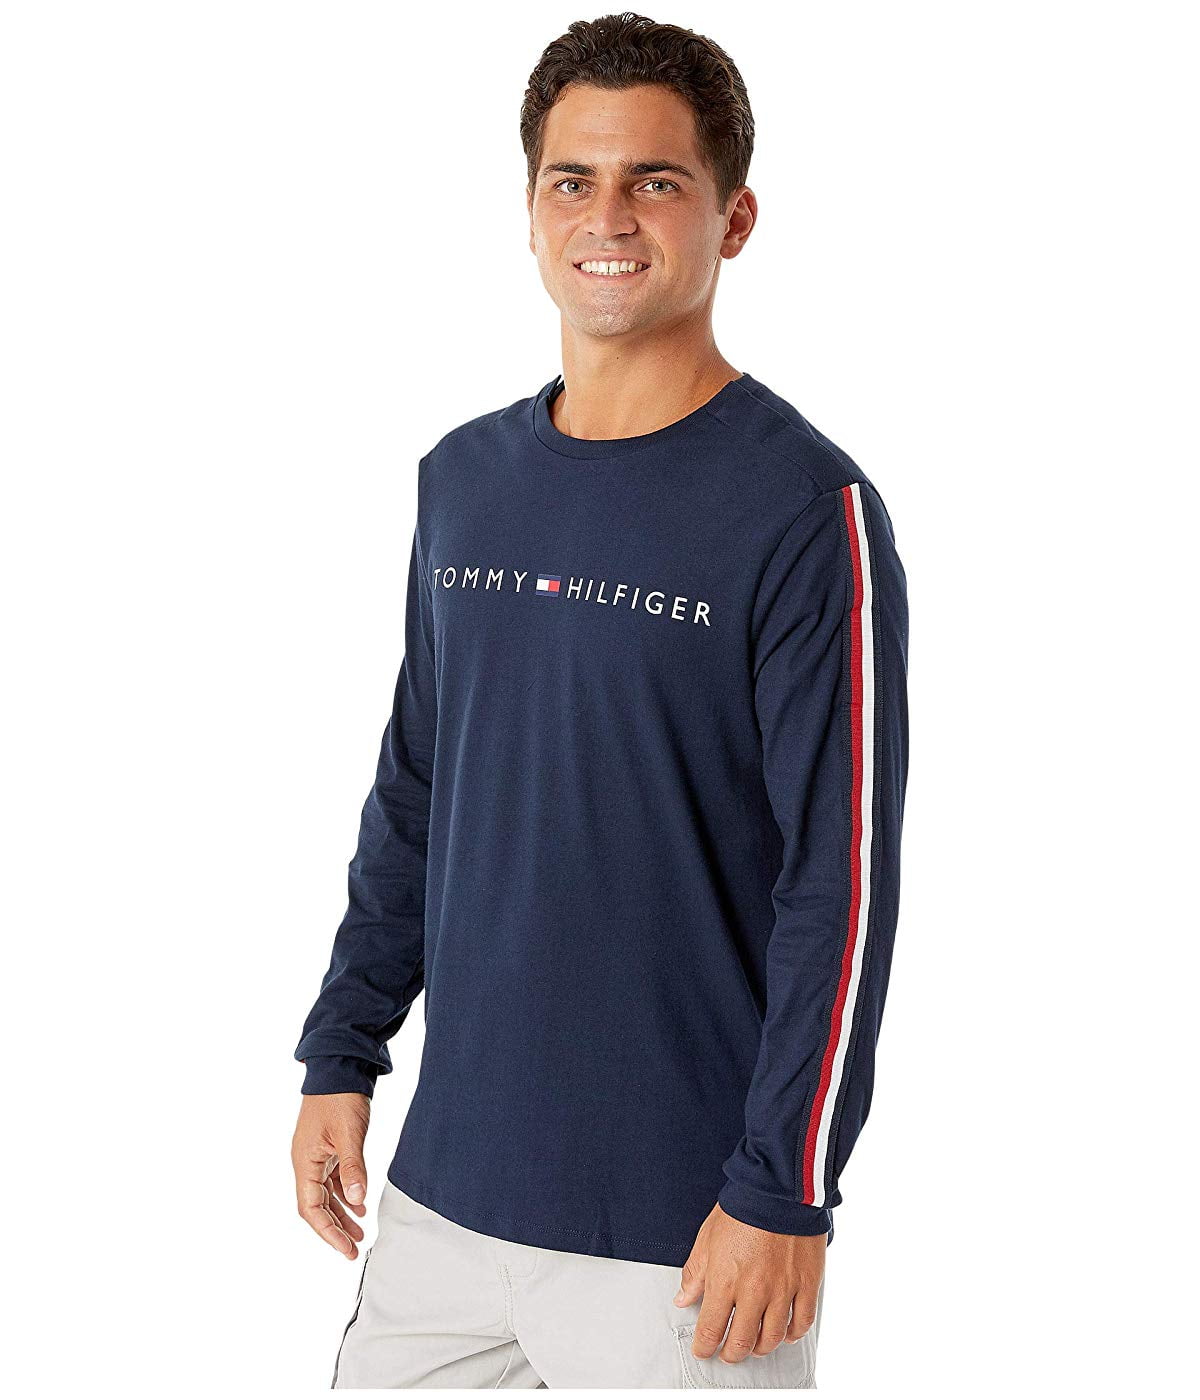 Tommy Hilfiger Mens Adaptive Sweater with Velcro Brand Closure at Shoulders 